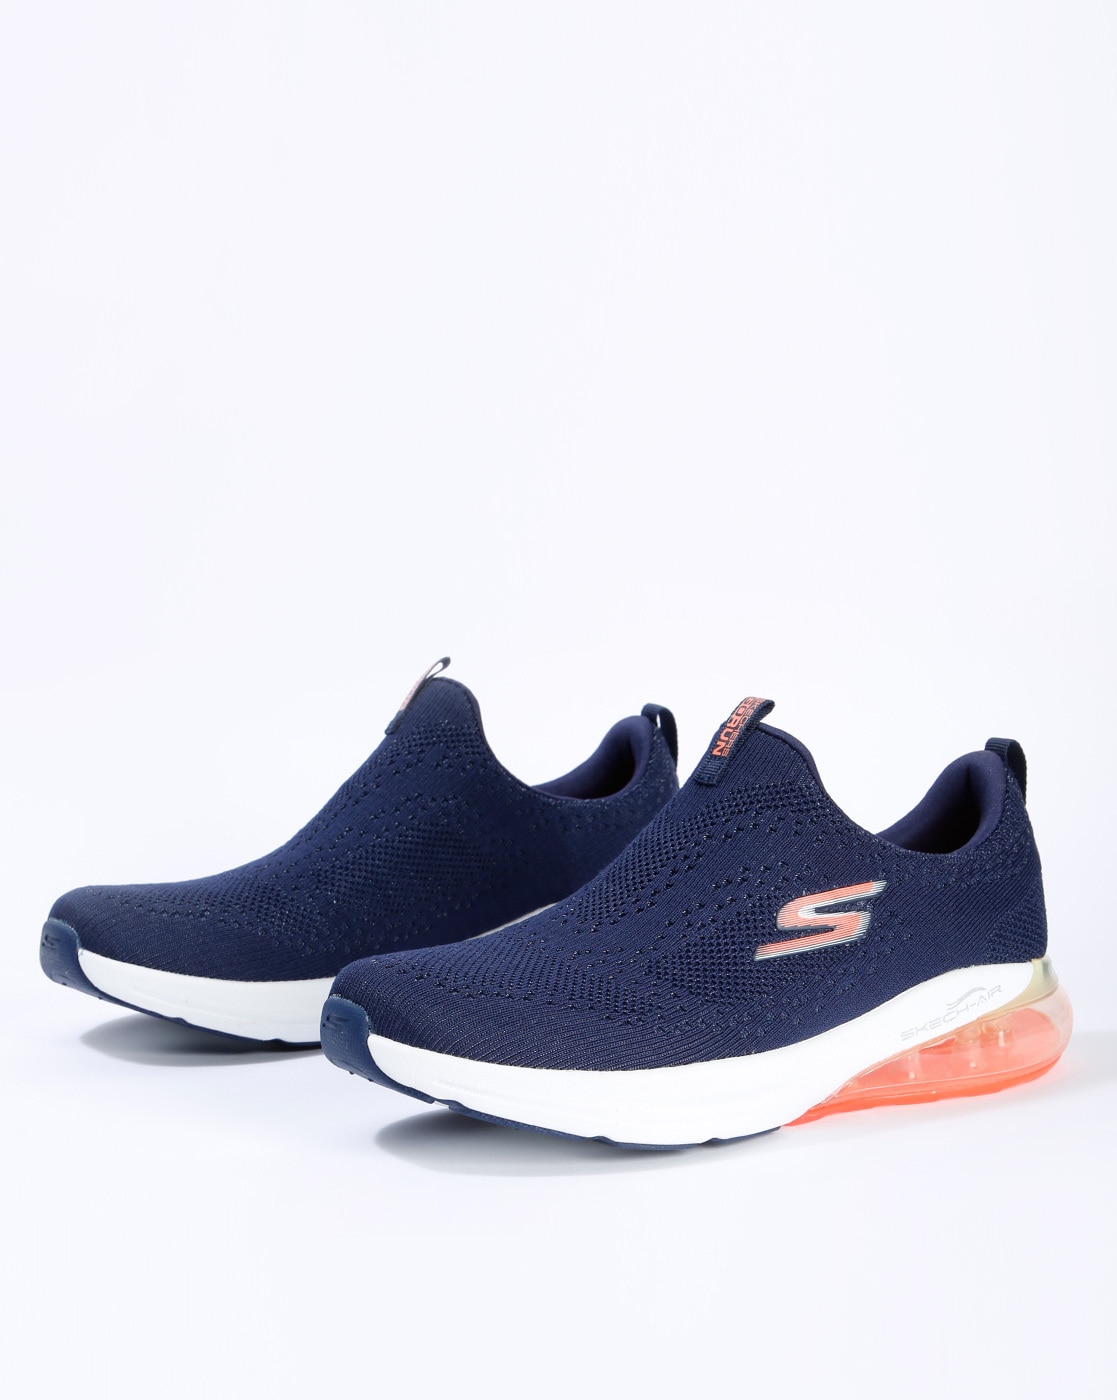 skechers on the go navy blue running shoes